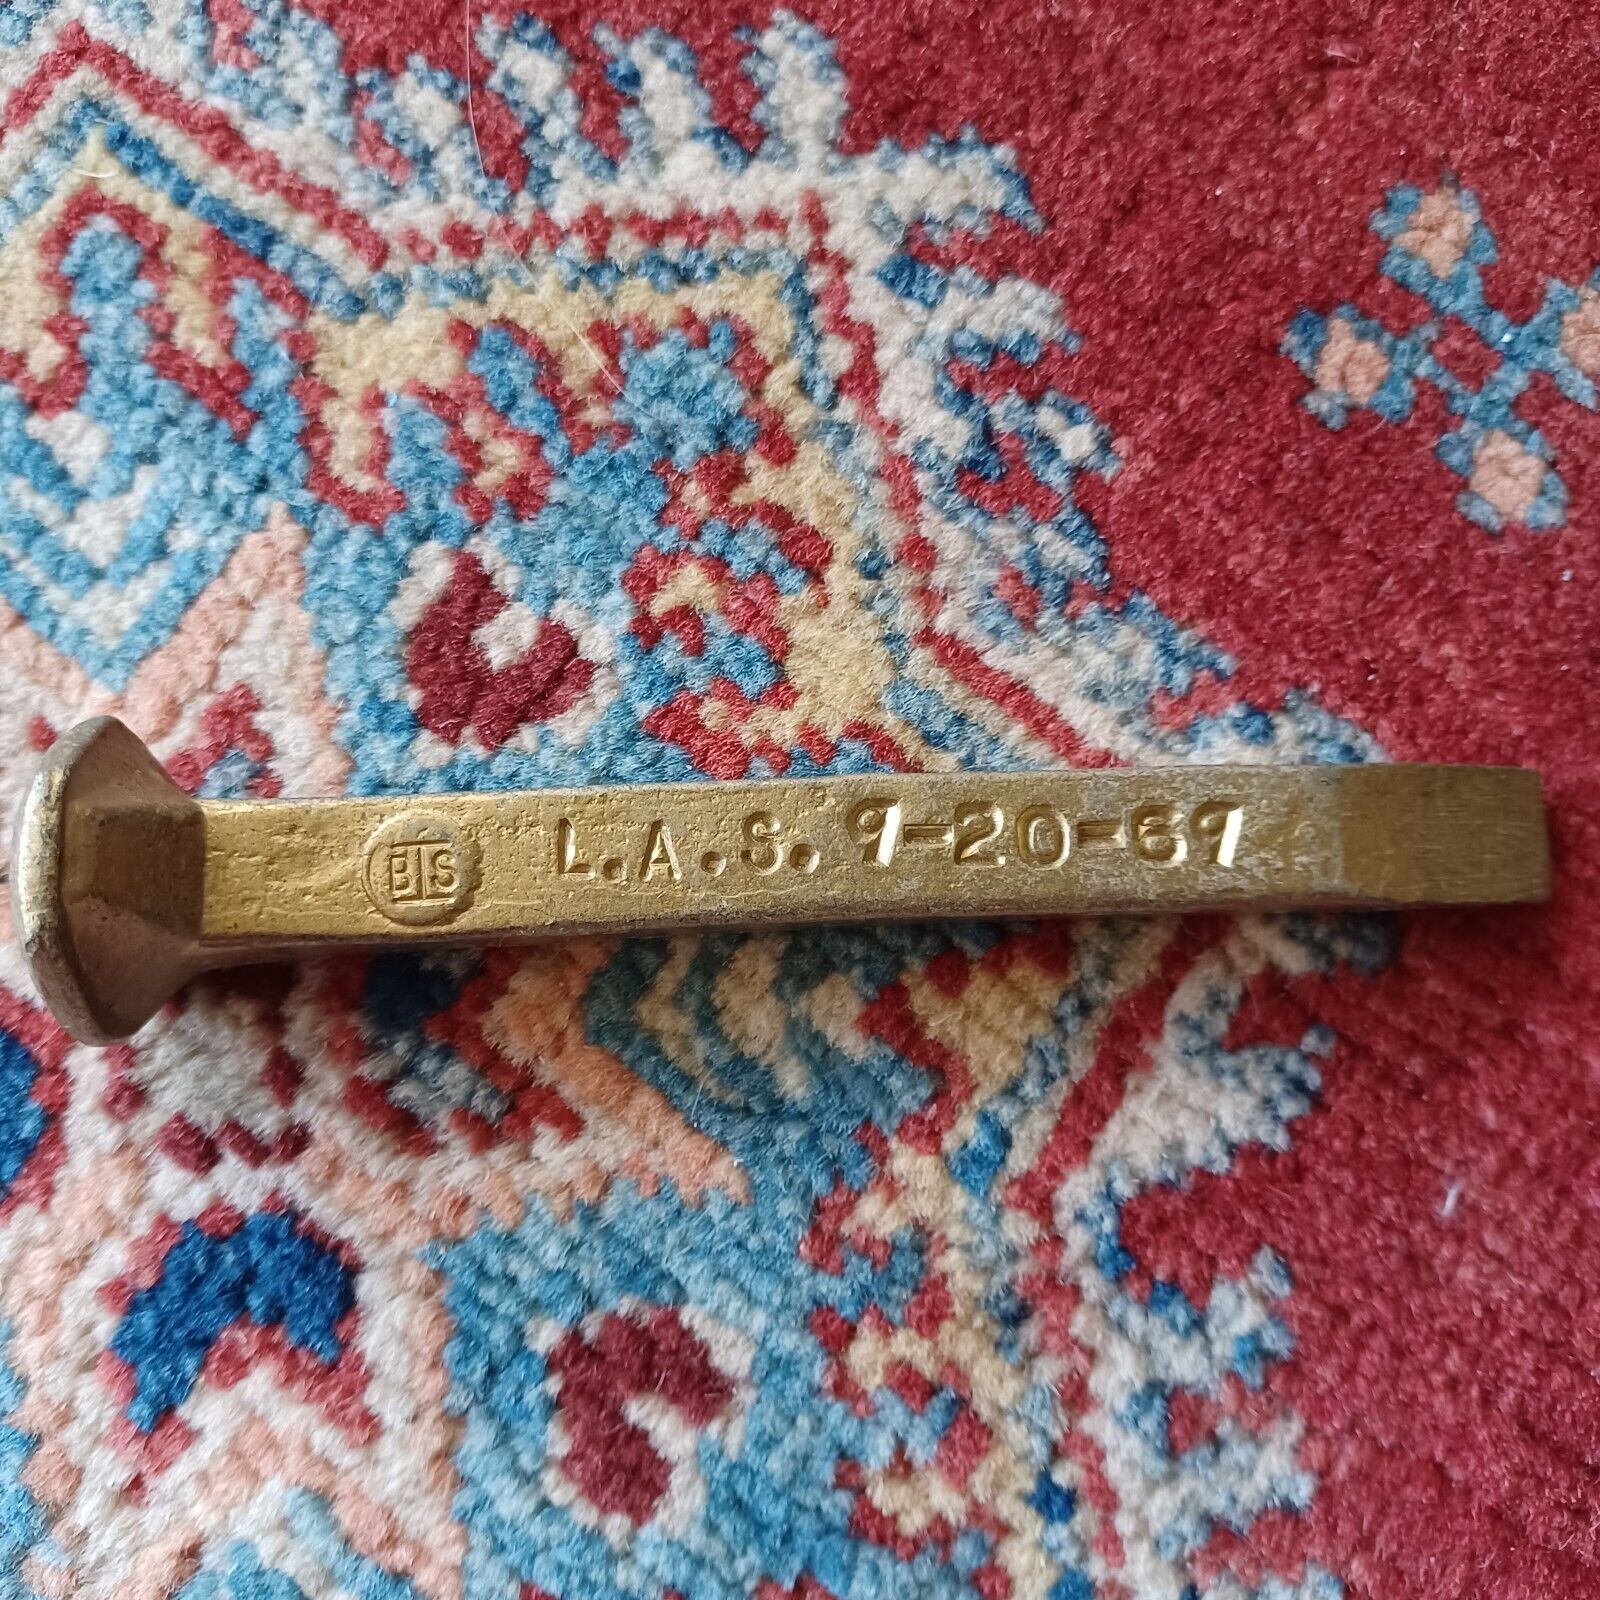 L.A.S. 9-20-69 Railroad Train Stake Spike Nail Collectible BIS